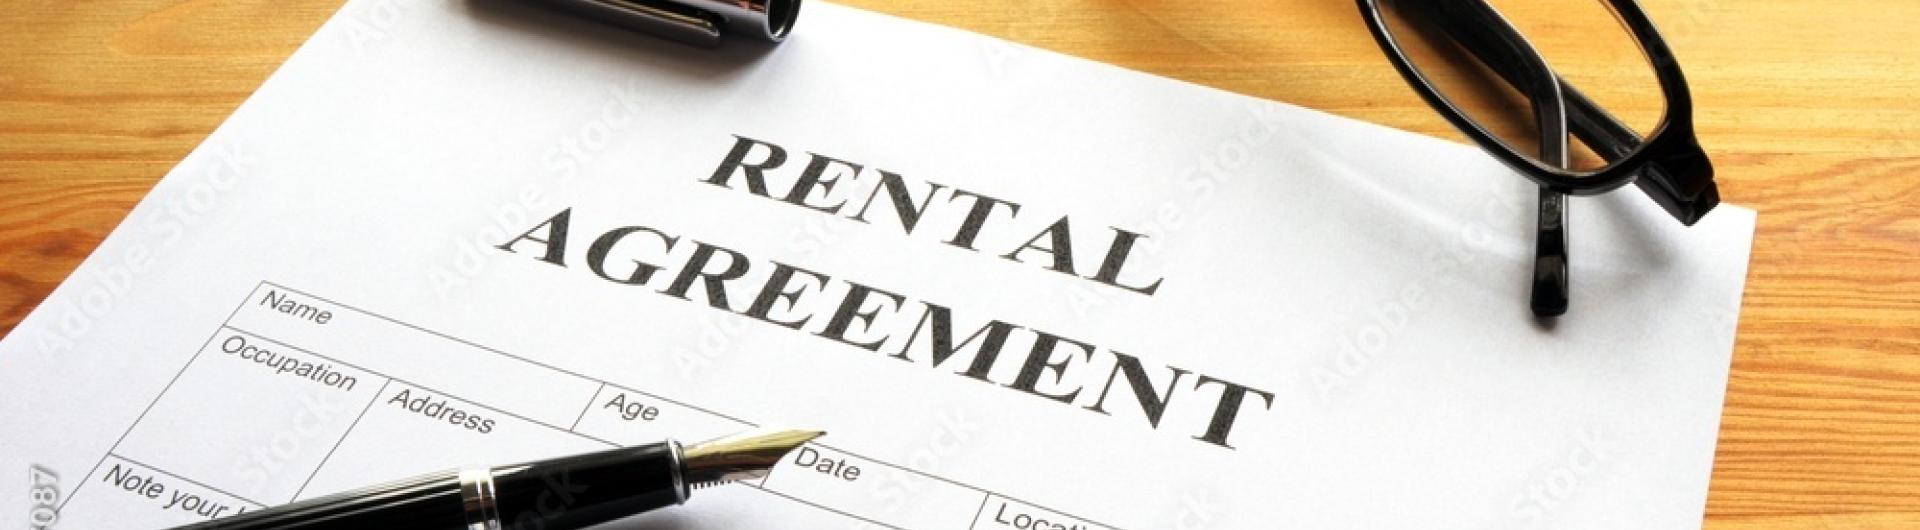 rental agreement and pen for signature